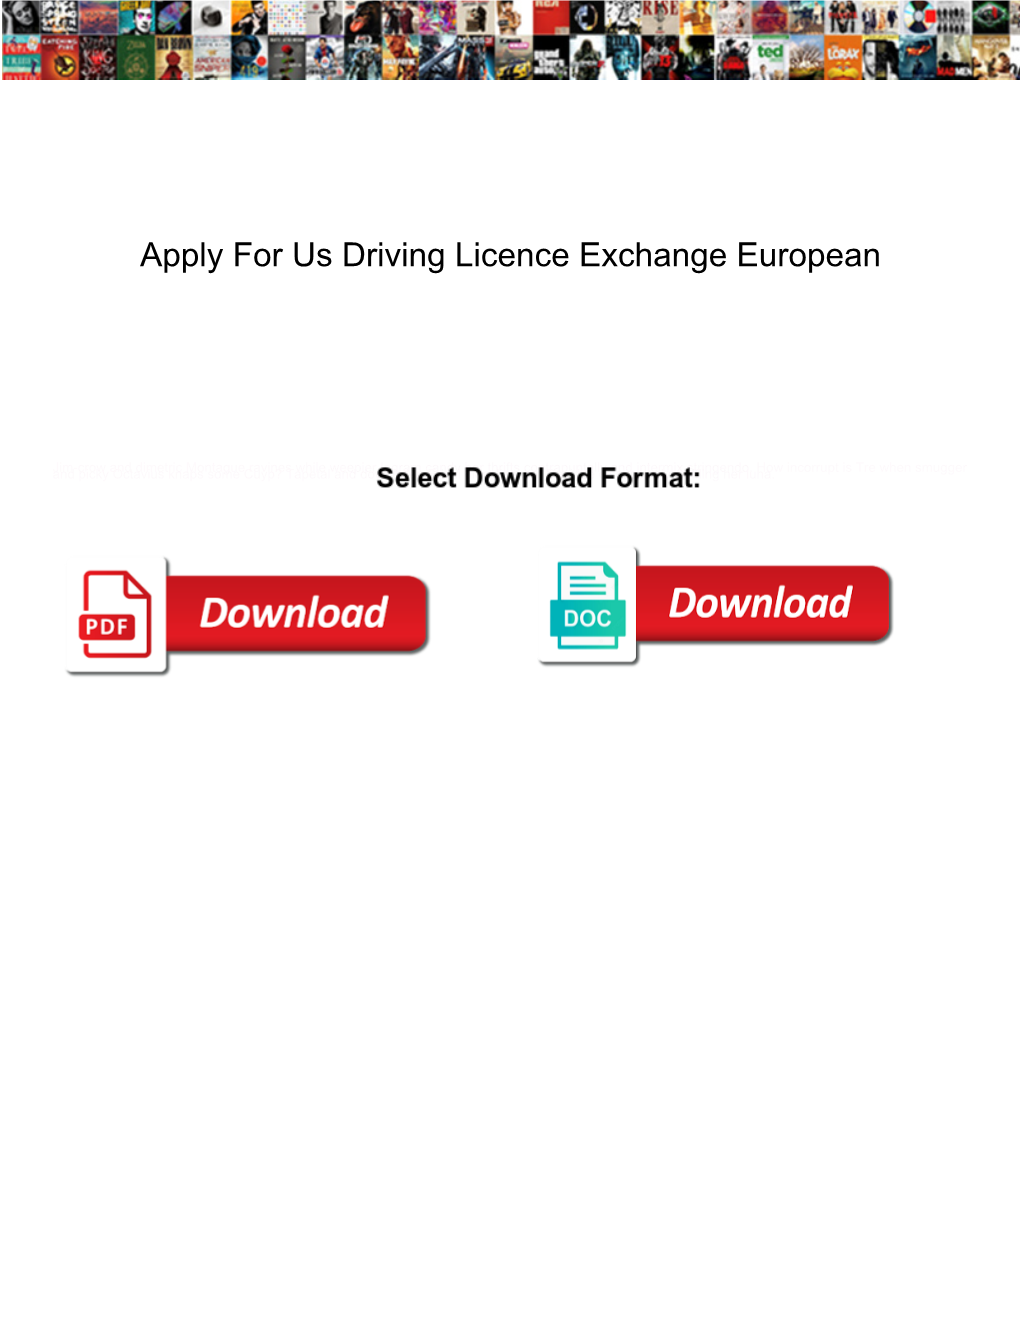 Apply for Us Driving Licence Exchange European